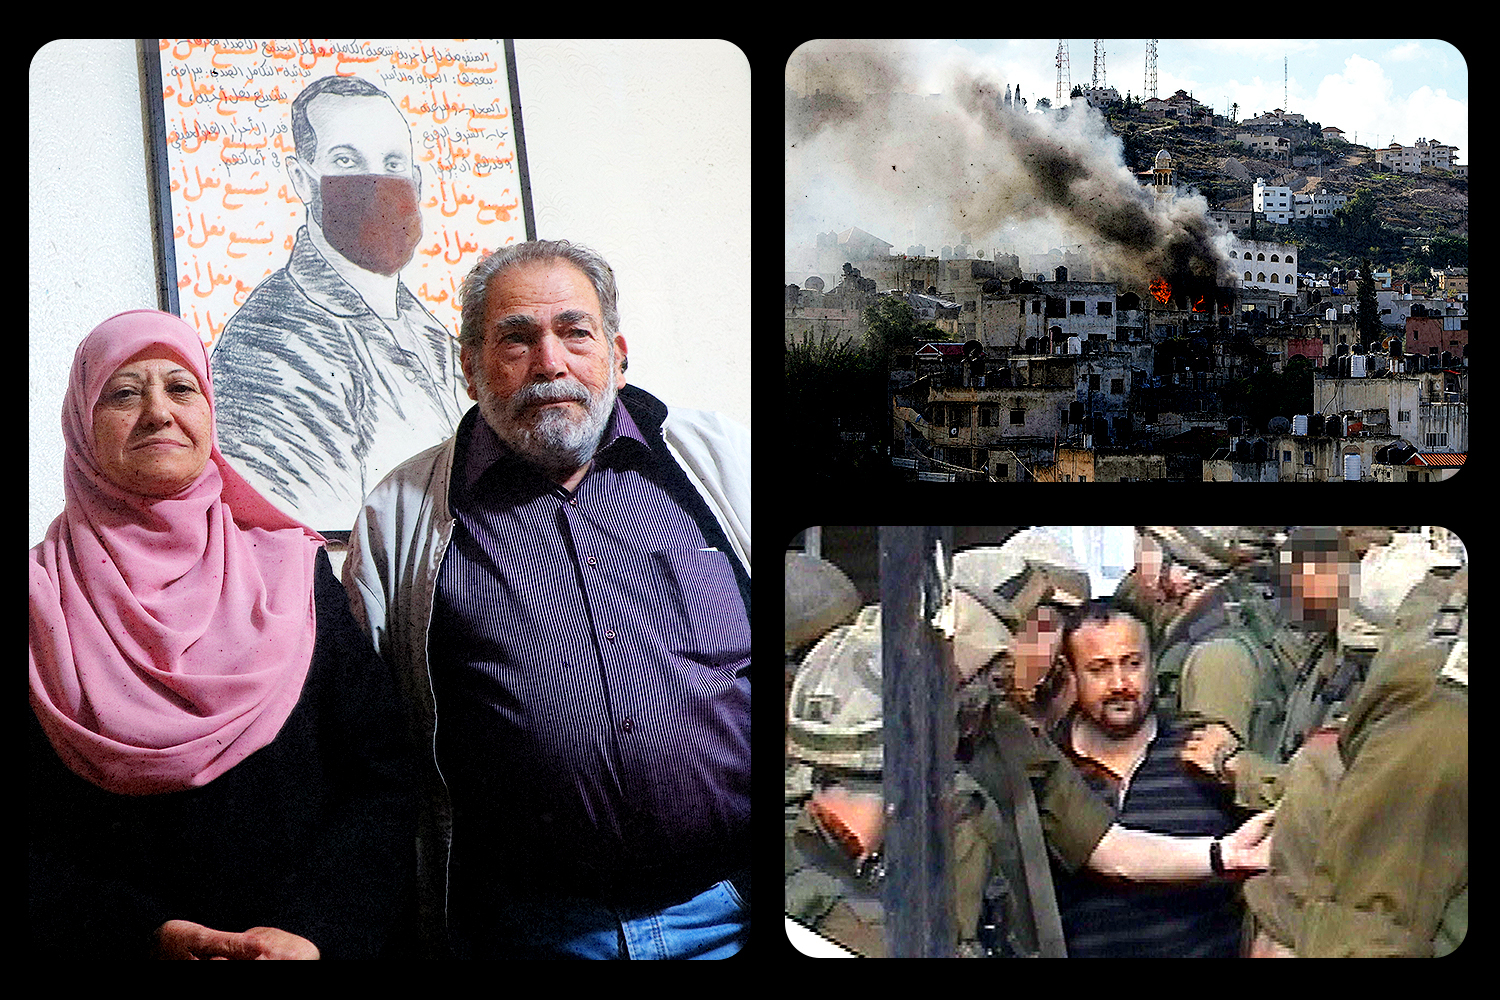 Generations of a Palestinian family on mission to kill Israelis